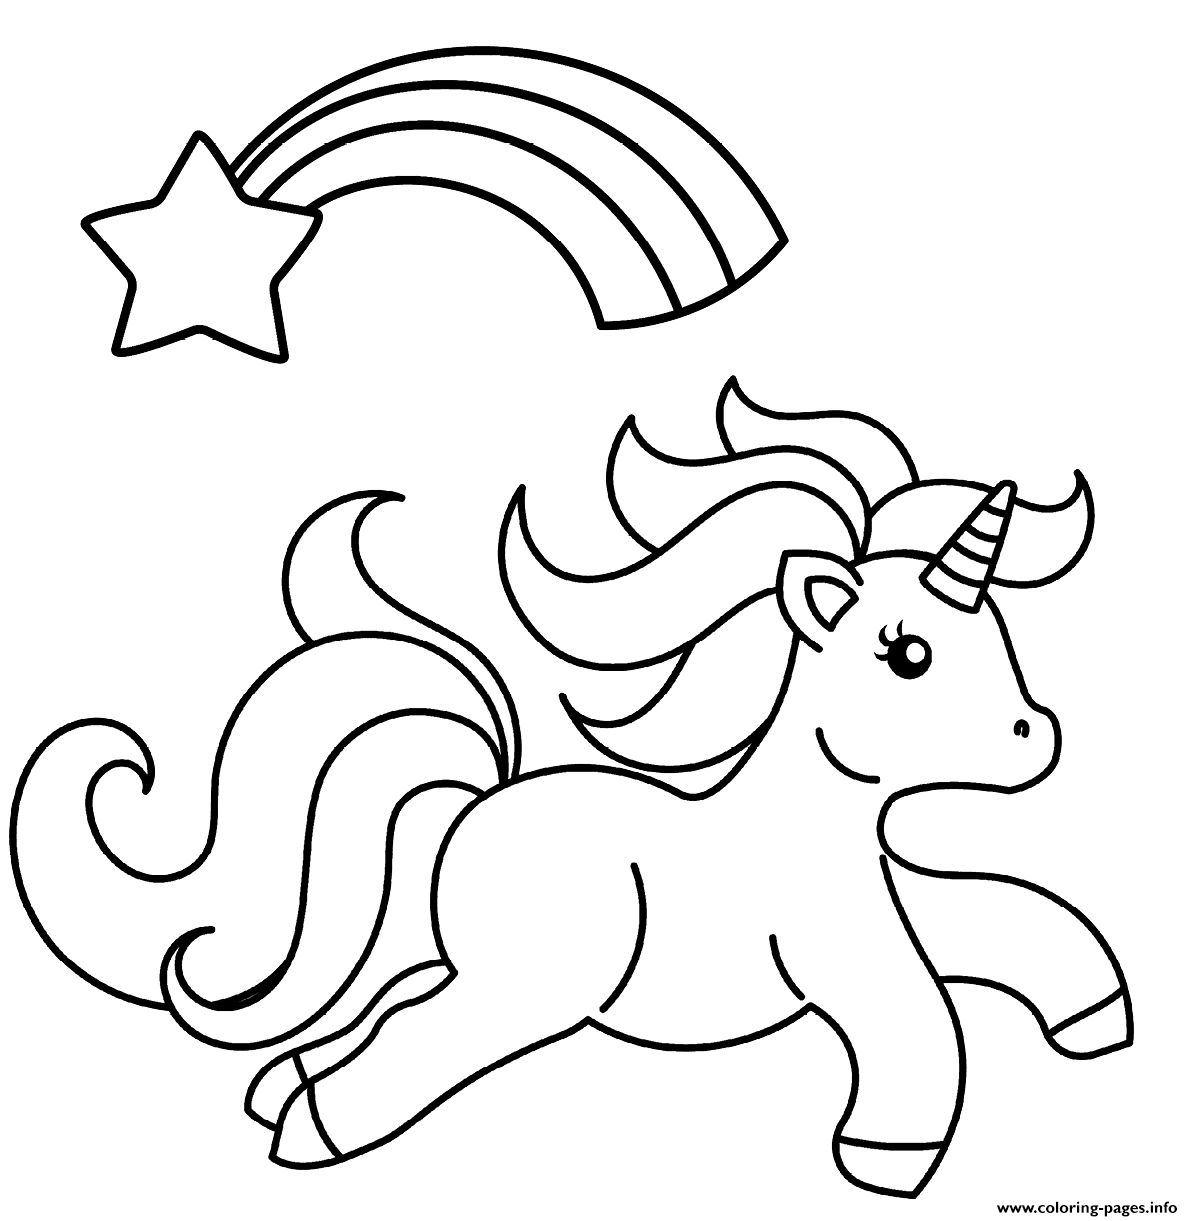 A Sweet Little Unicorn With A Shooting Star coloring